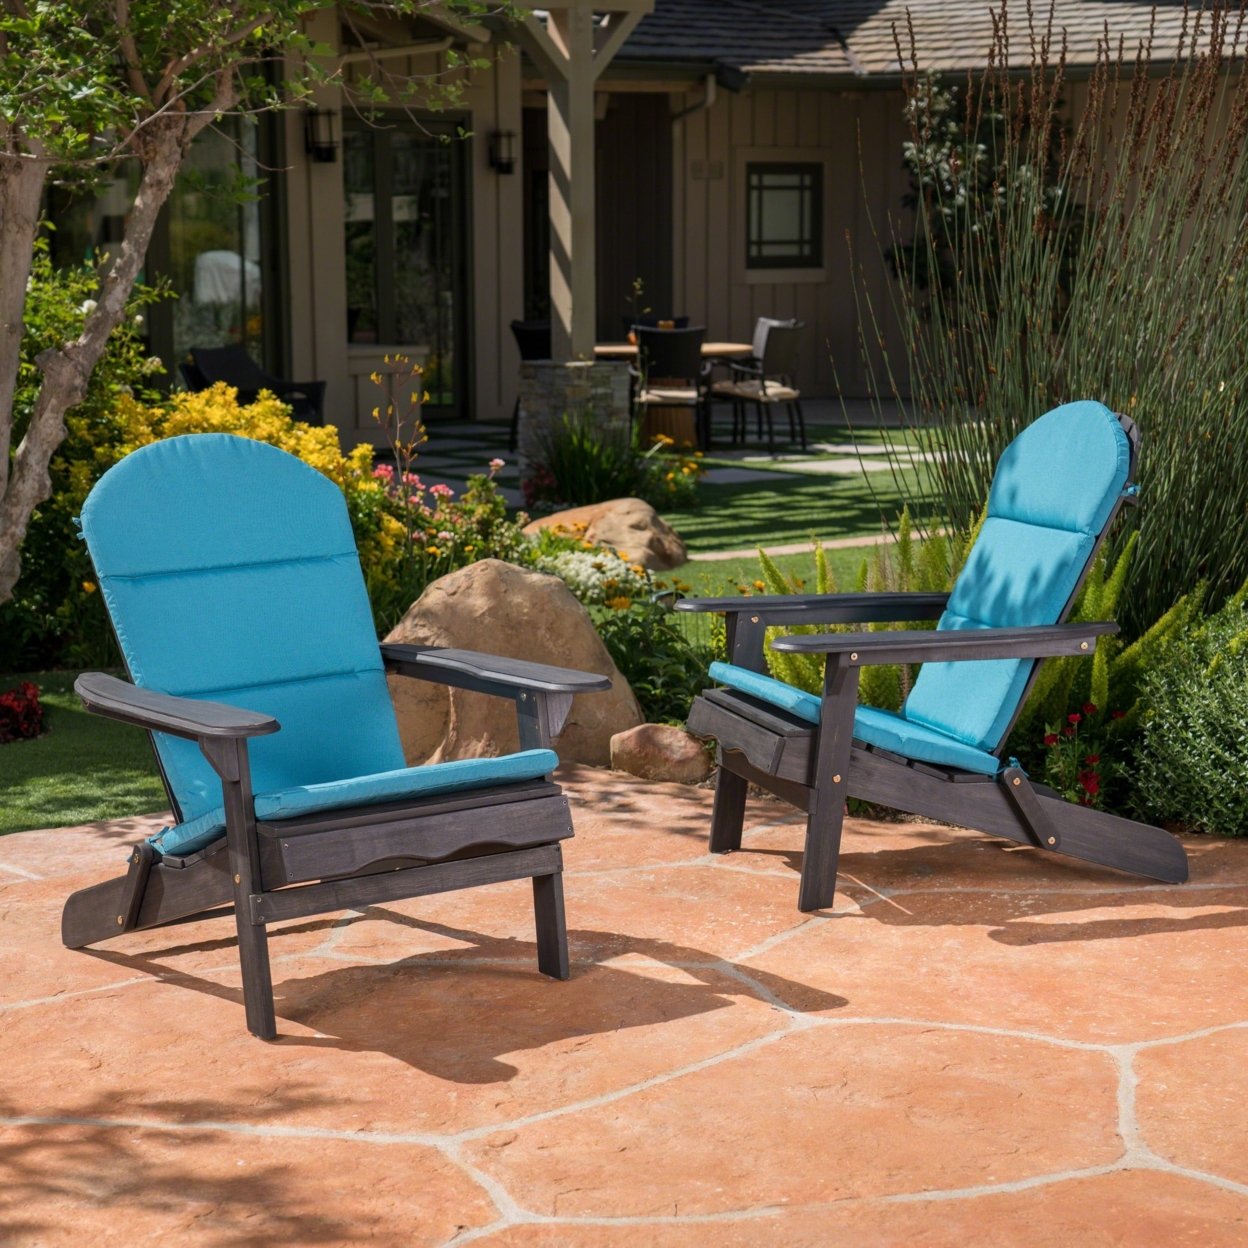 Nelie Outdoor Acacia Wood Adirondack Chairs With Cushions - Dark Teal, Set Of 2